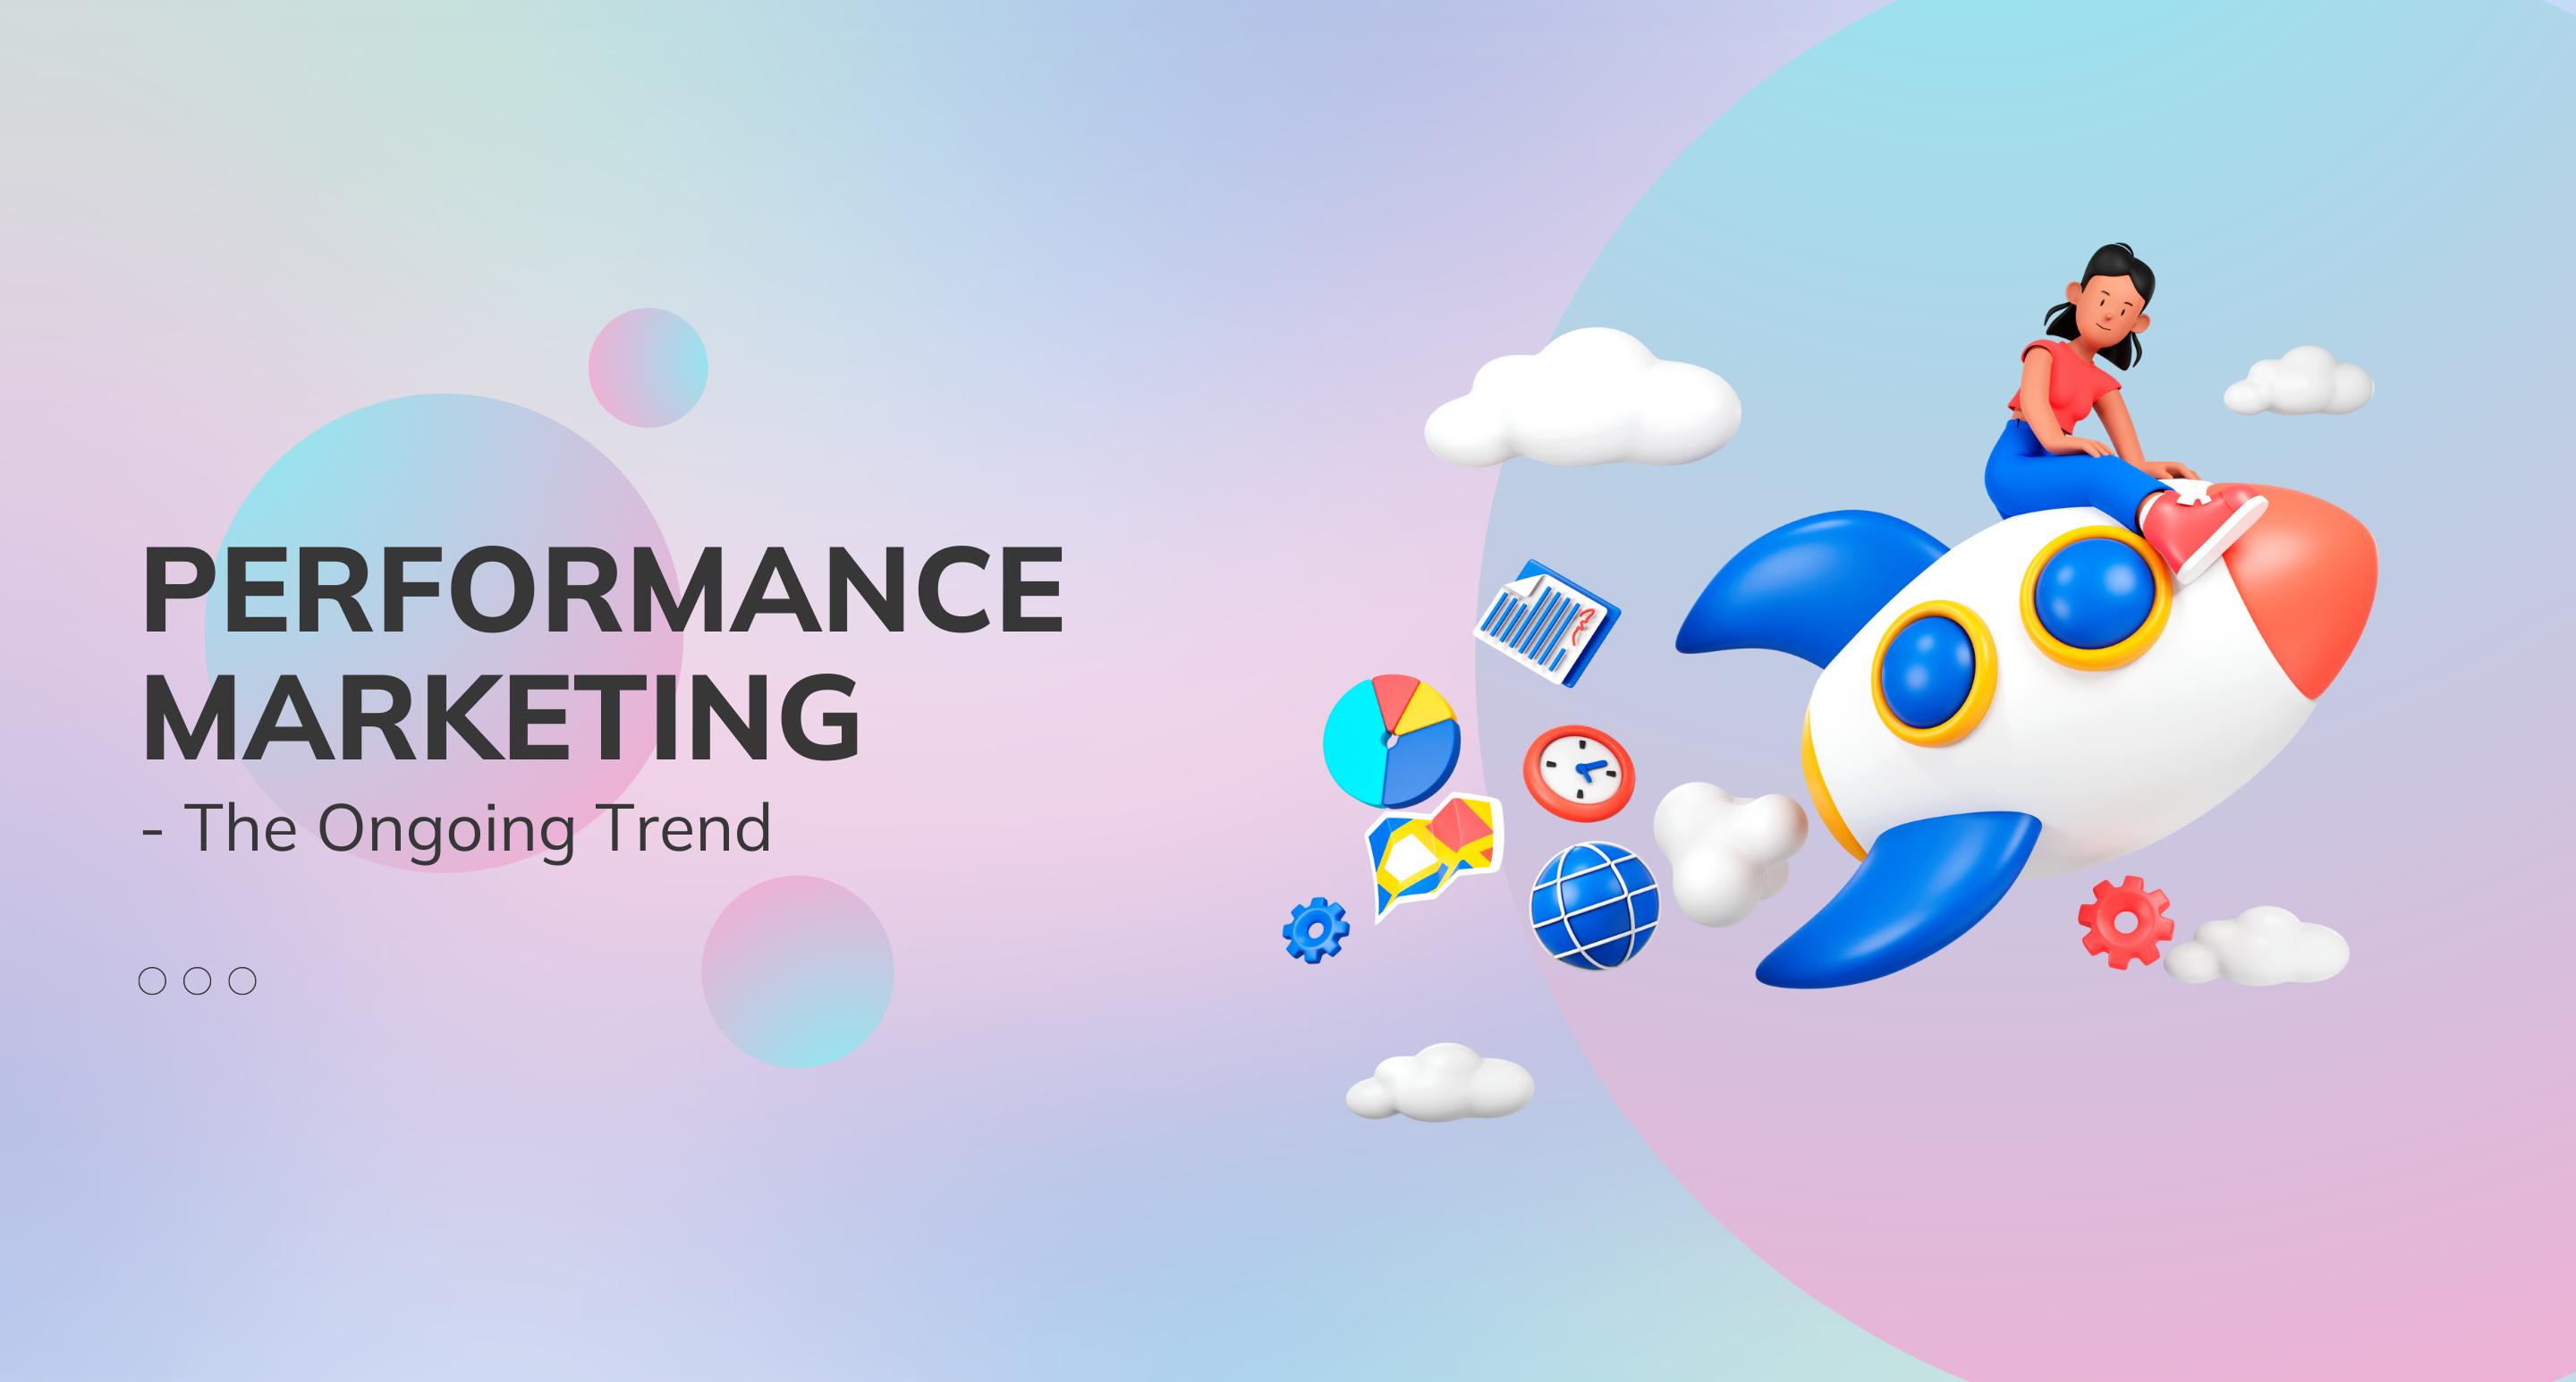 Performance Marketing - The Ongoing Trend